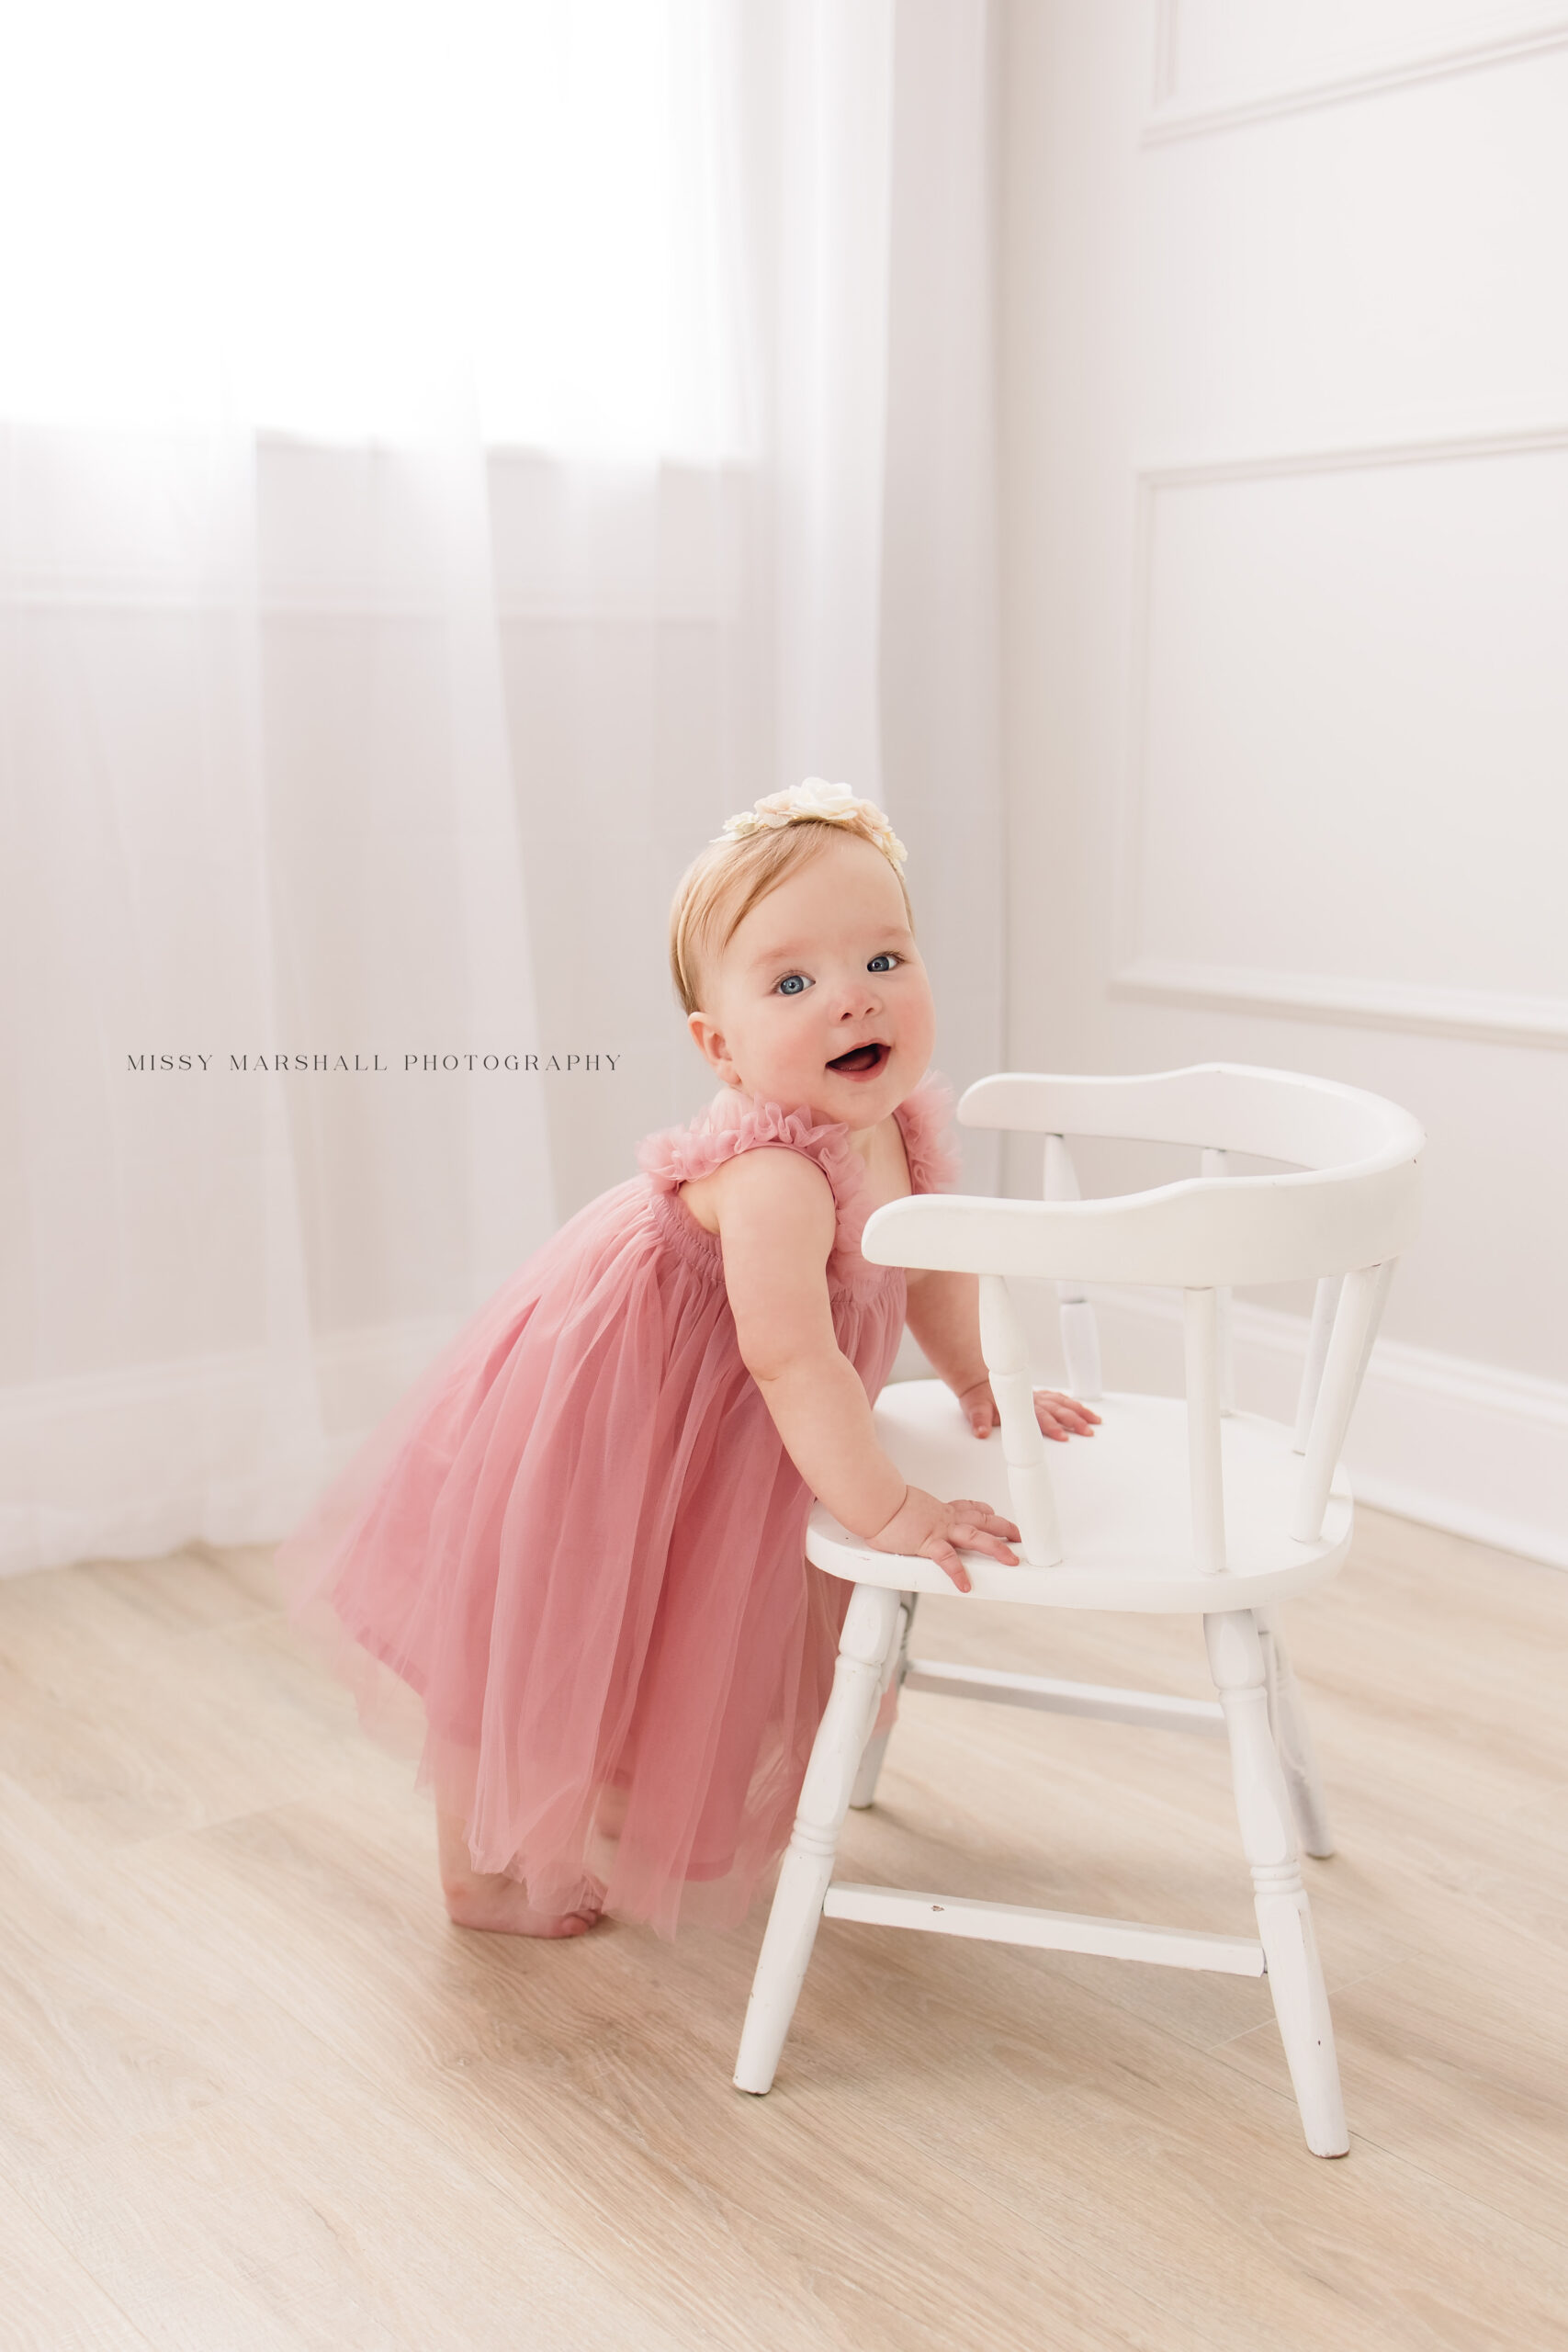 One year old baby girl wearing a pink tulle dress and standing up holding on to a white wooden chair in a beautiful bright studio